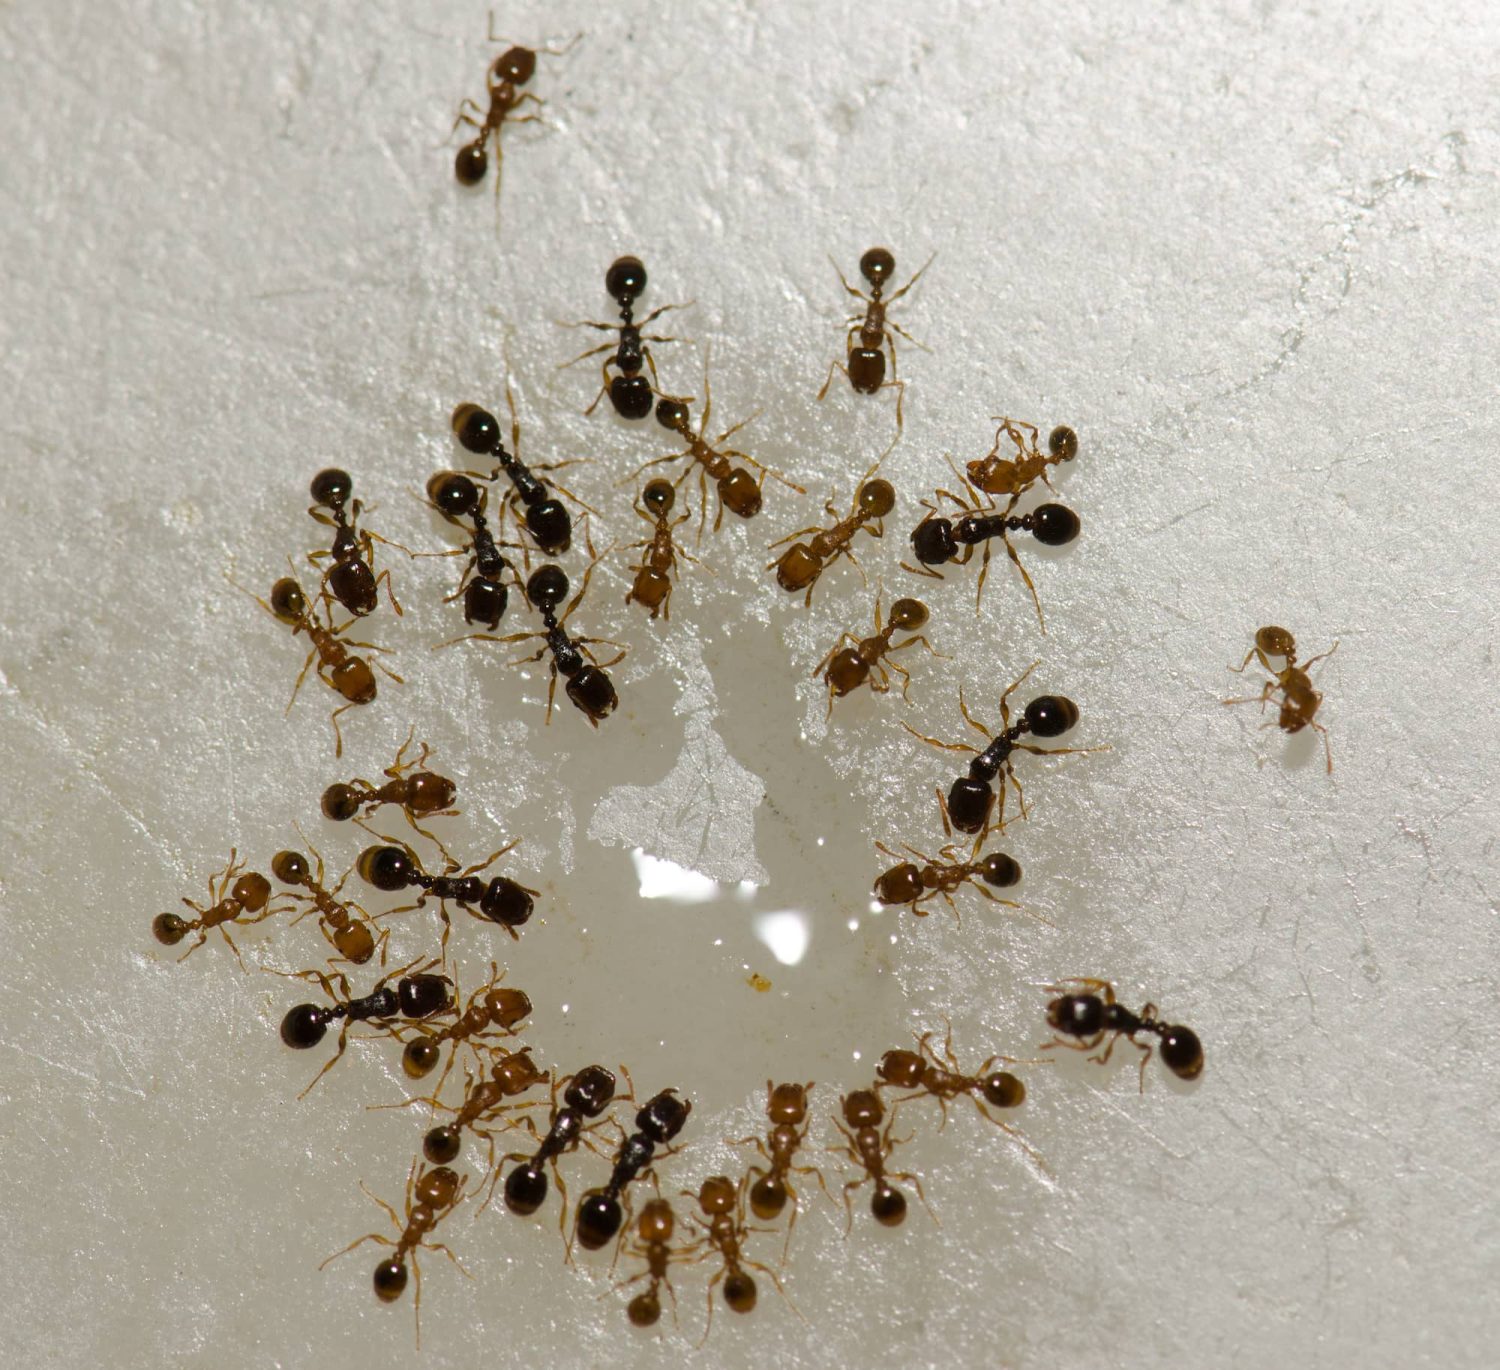 Argentine ants (Linepithema humile)